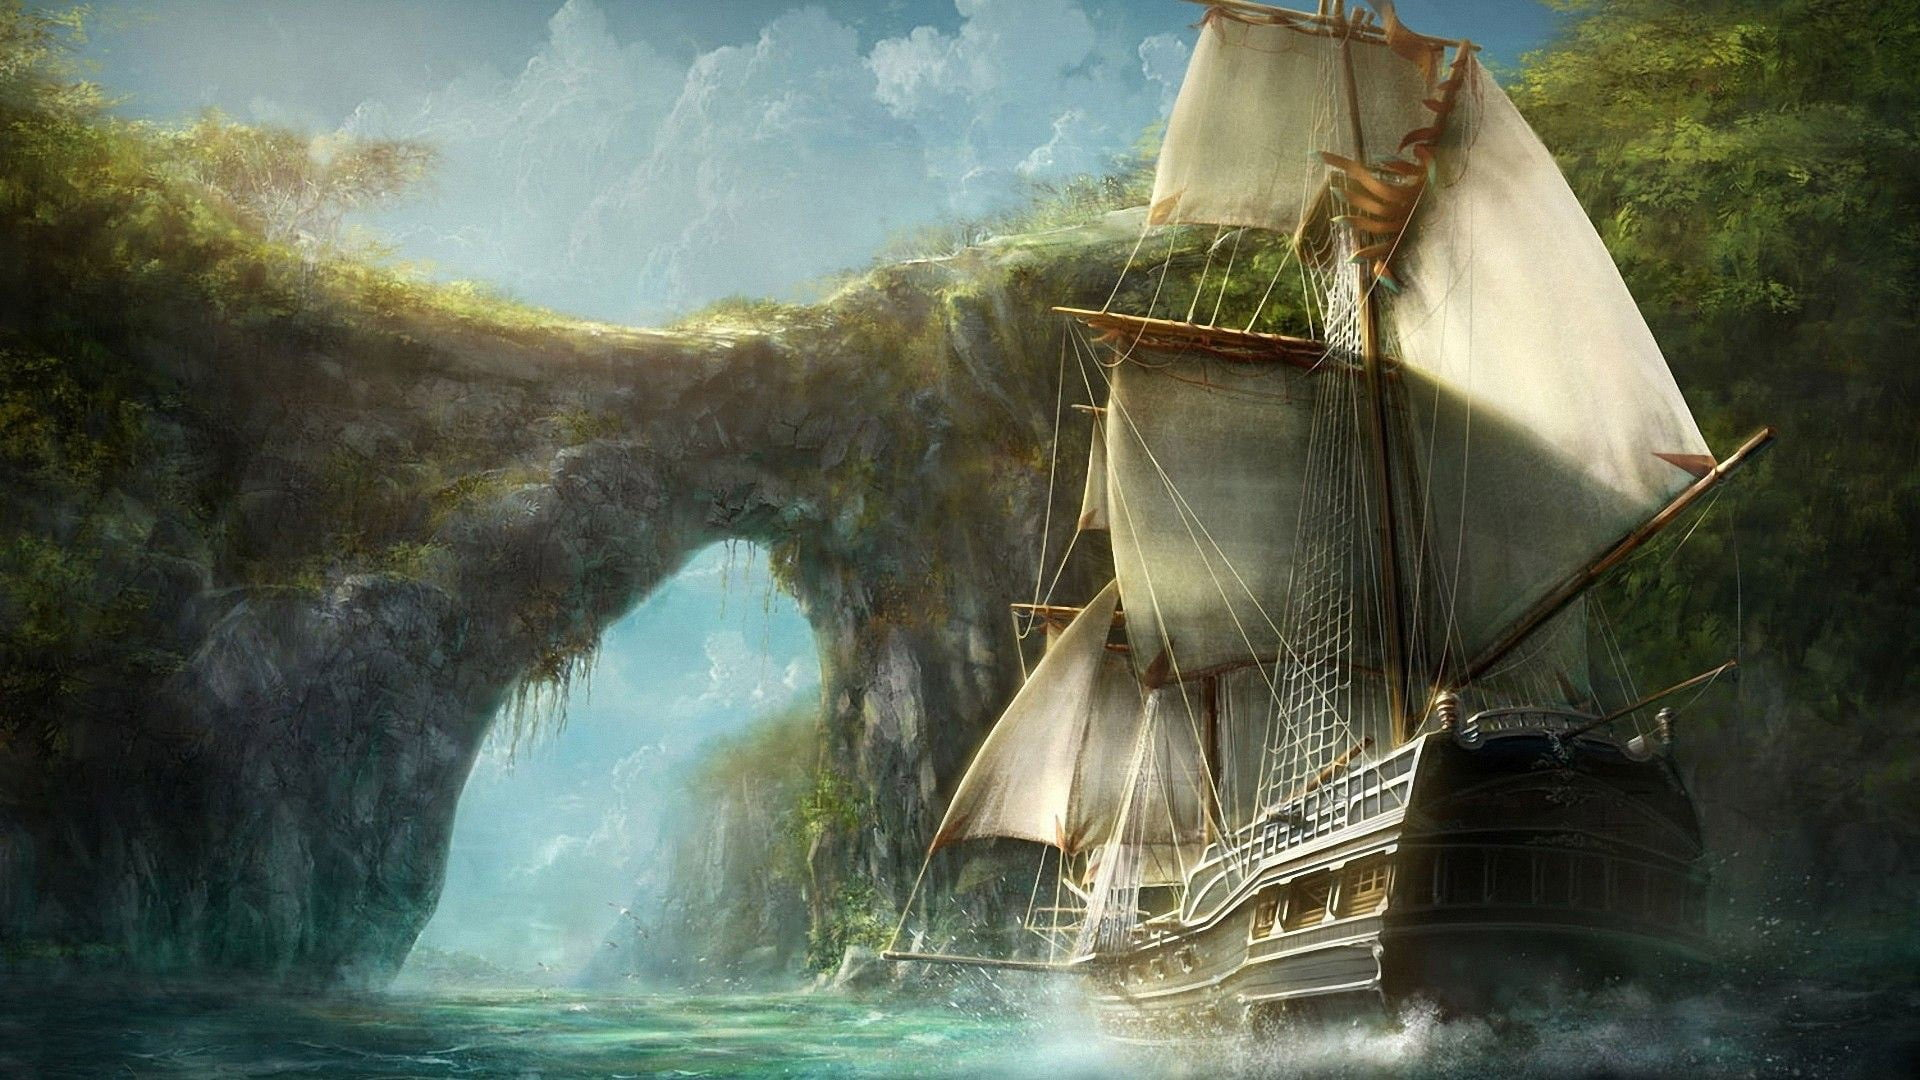 1920x1080 White and brown galleon ship illustration, old ship, ship, rocks, water HD wallpaper